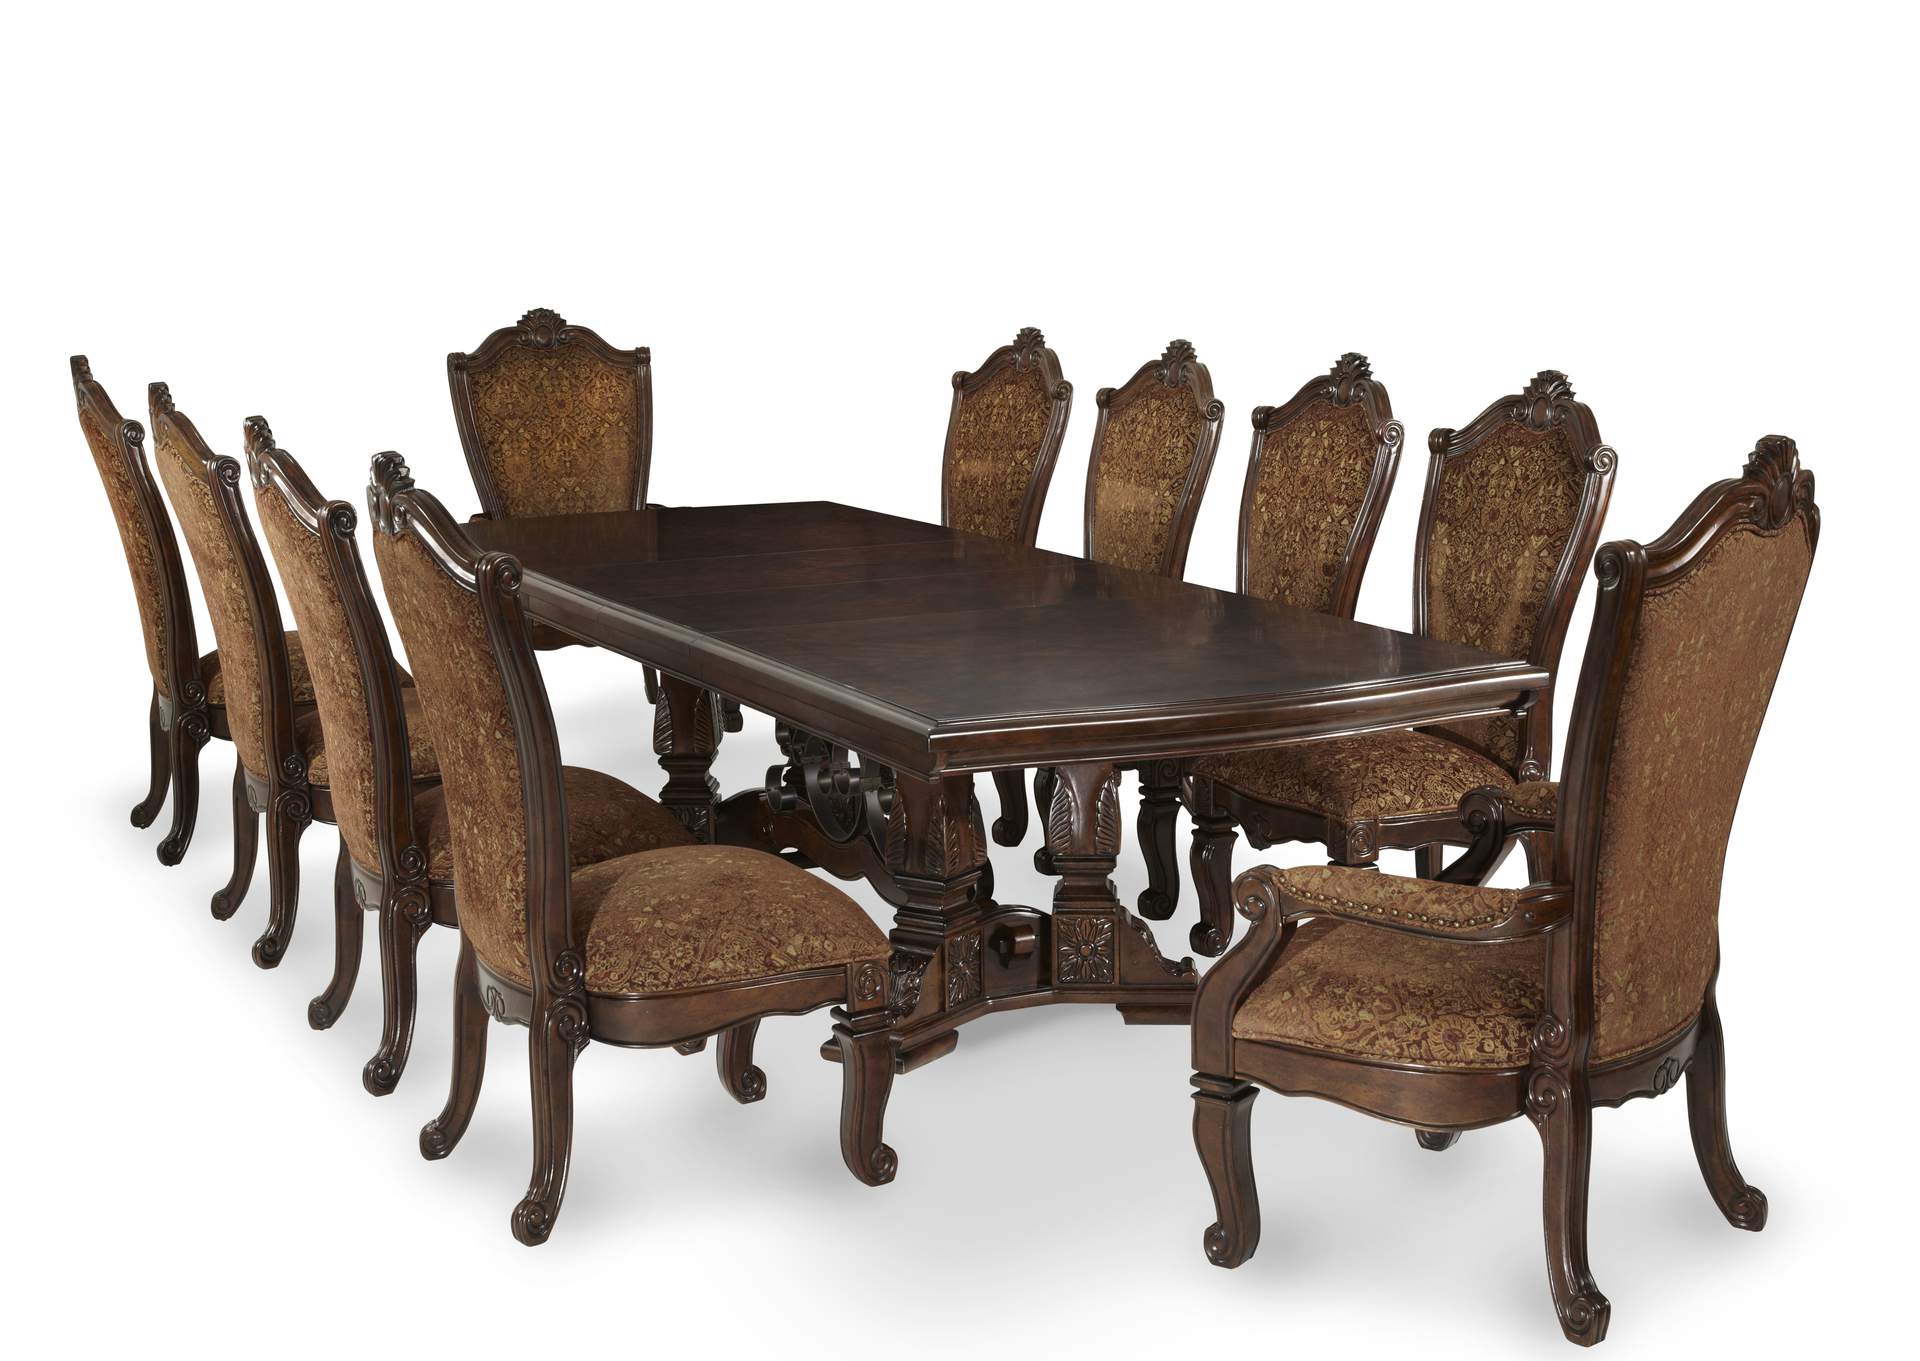 Windsor Court Vintage Fruitwood Dining Table w/2 Arm Chairs & 8 Side Chairs,Michael Amini (AICO)